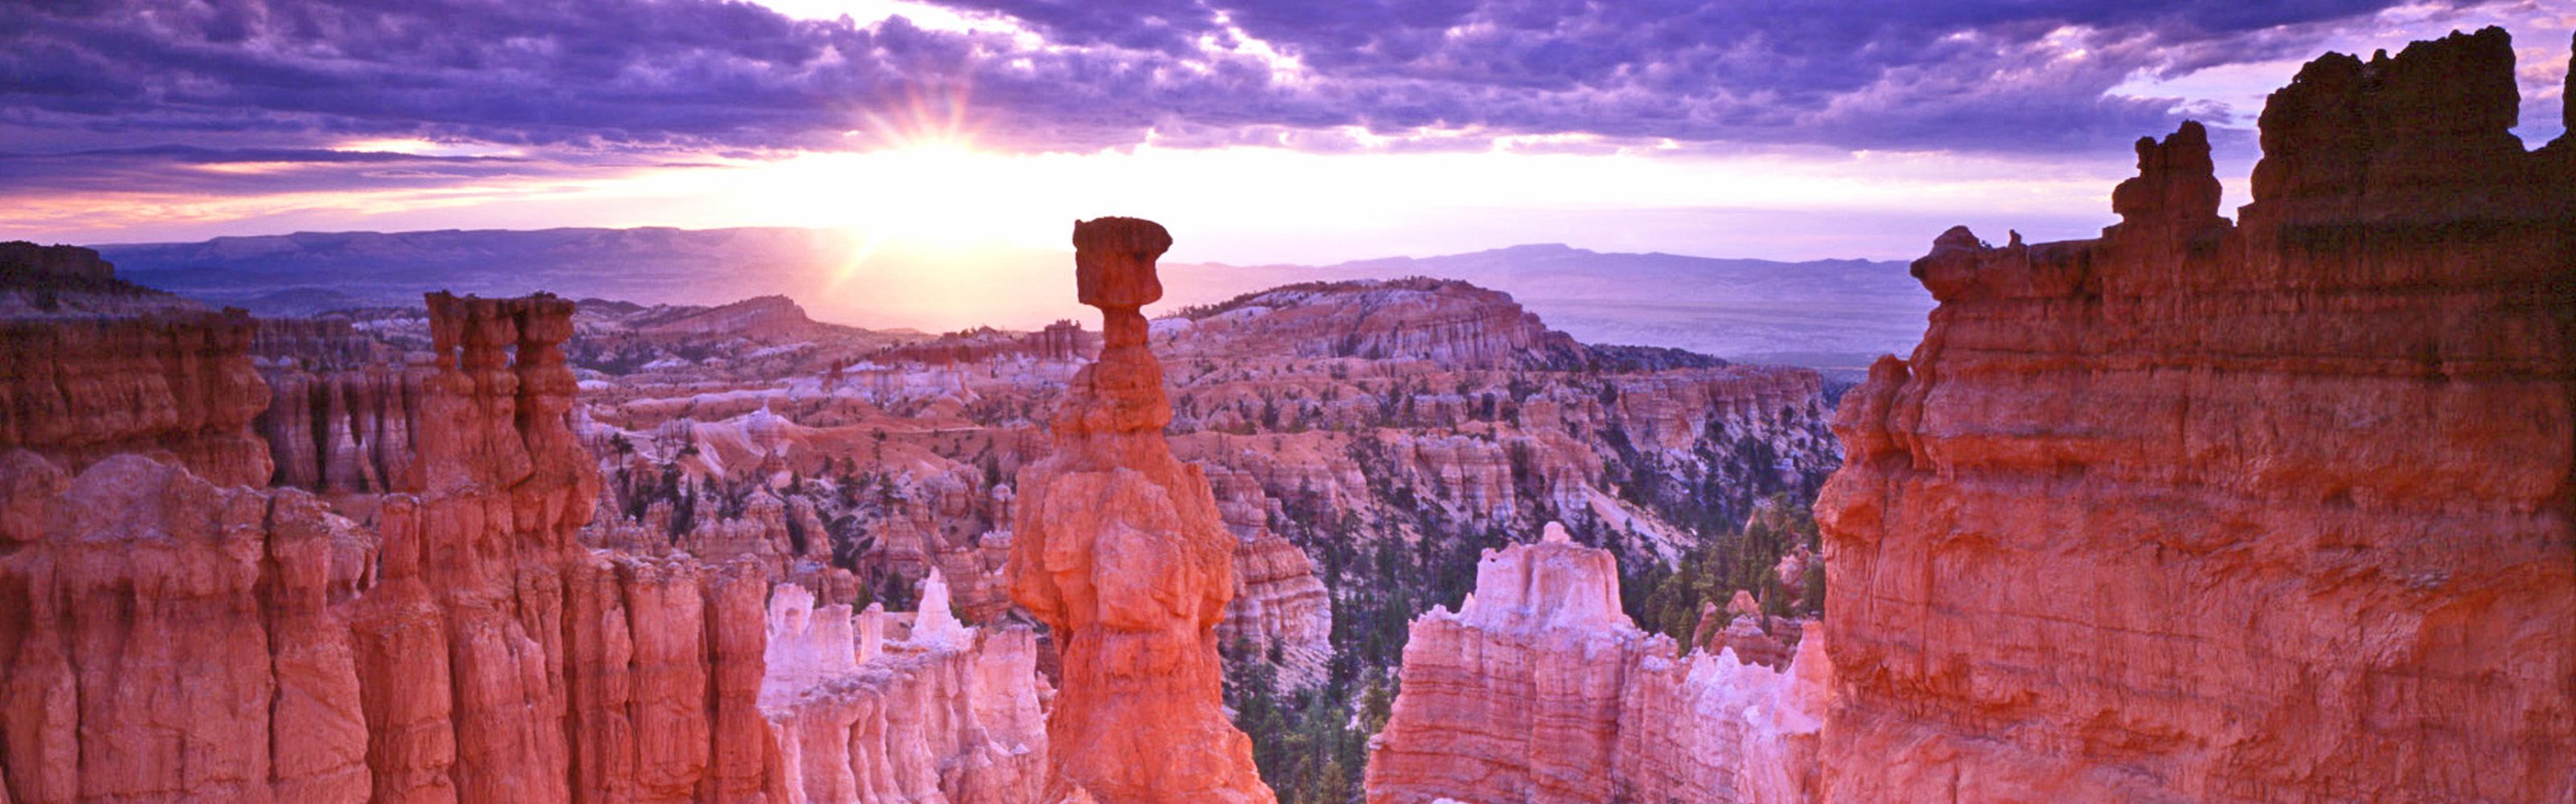 Bryce Canyon-Thors Hammer-Utah Office of Tourism by Camille Johnson 